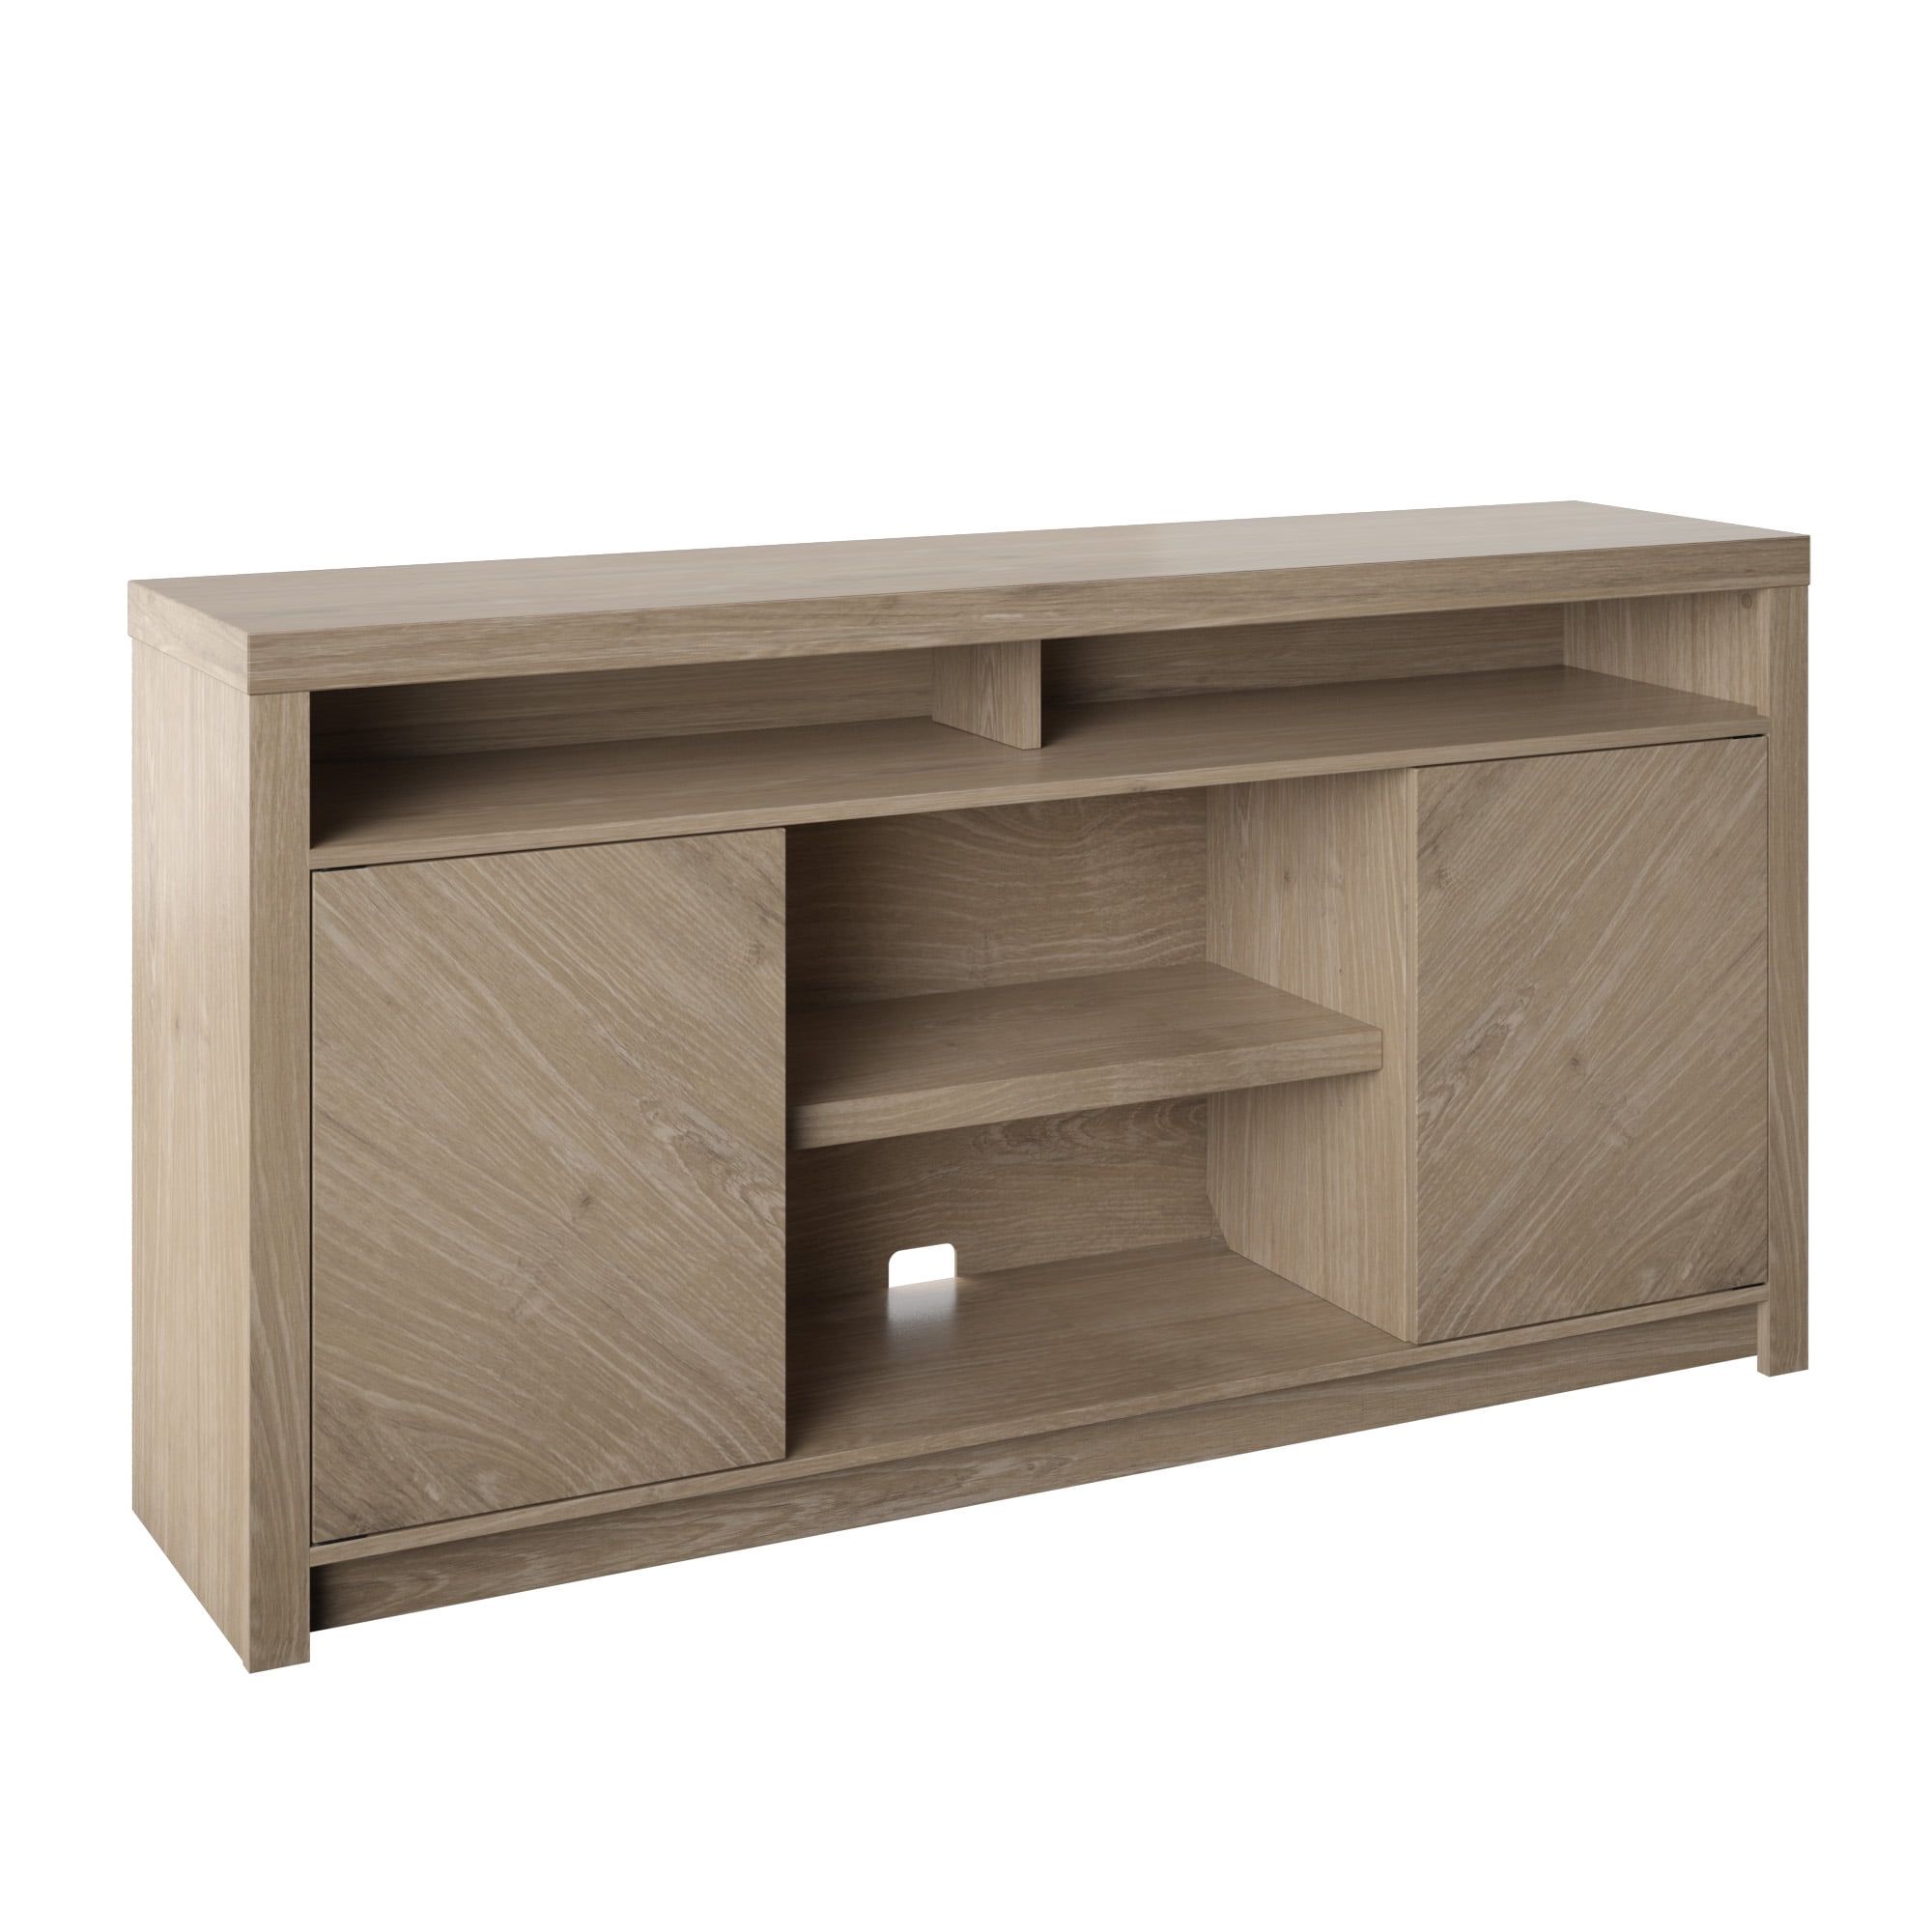 Contemporary Tv Stand For Tvs Up To 70" With Open Center Shelves, Natural  Oak – Walmart Within Cafe Tv Stands With Storage (View 15 of 15)